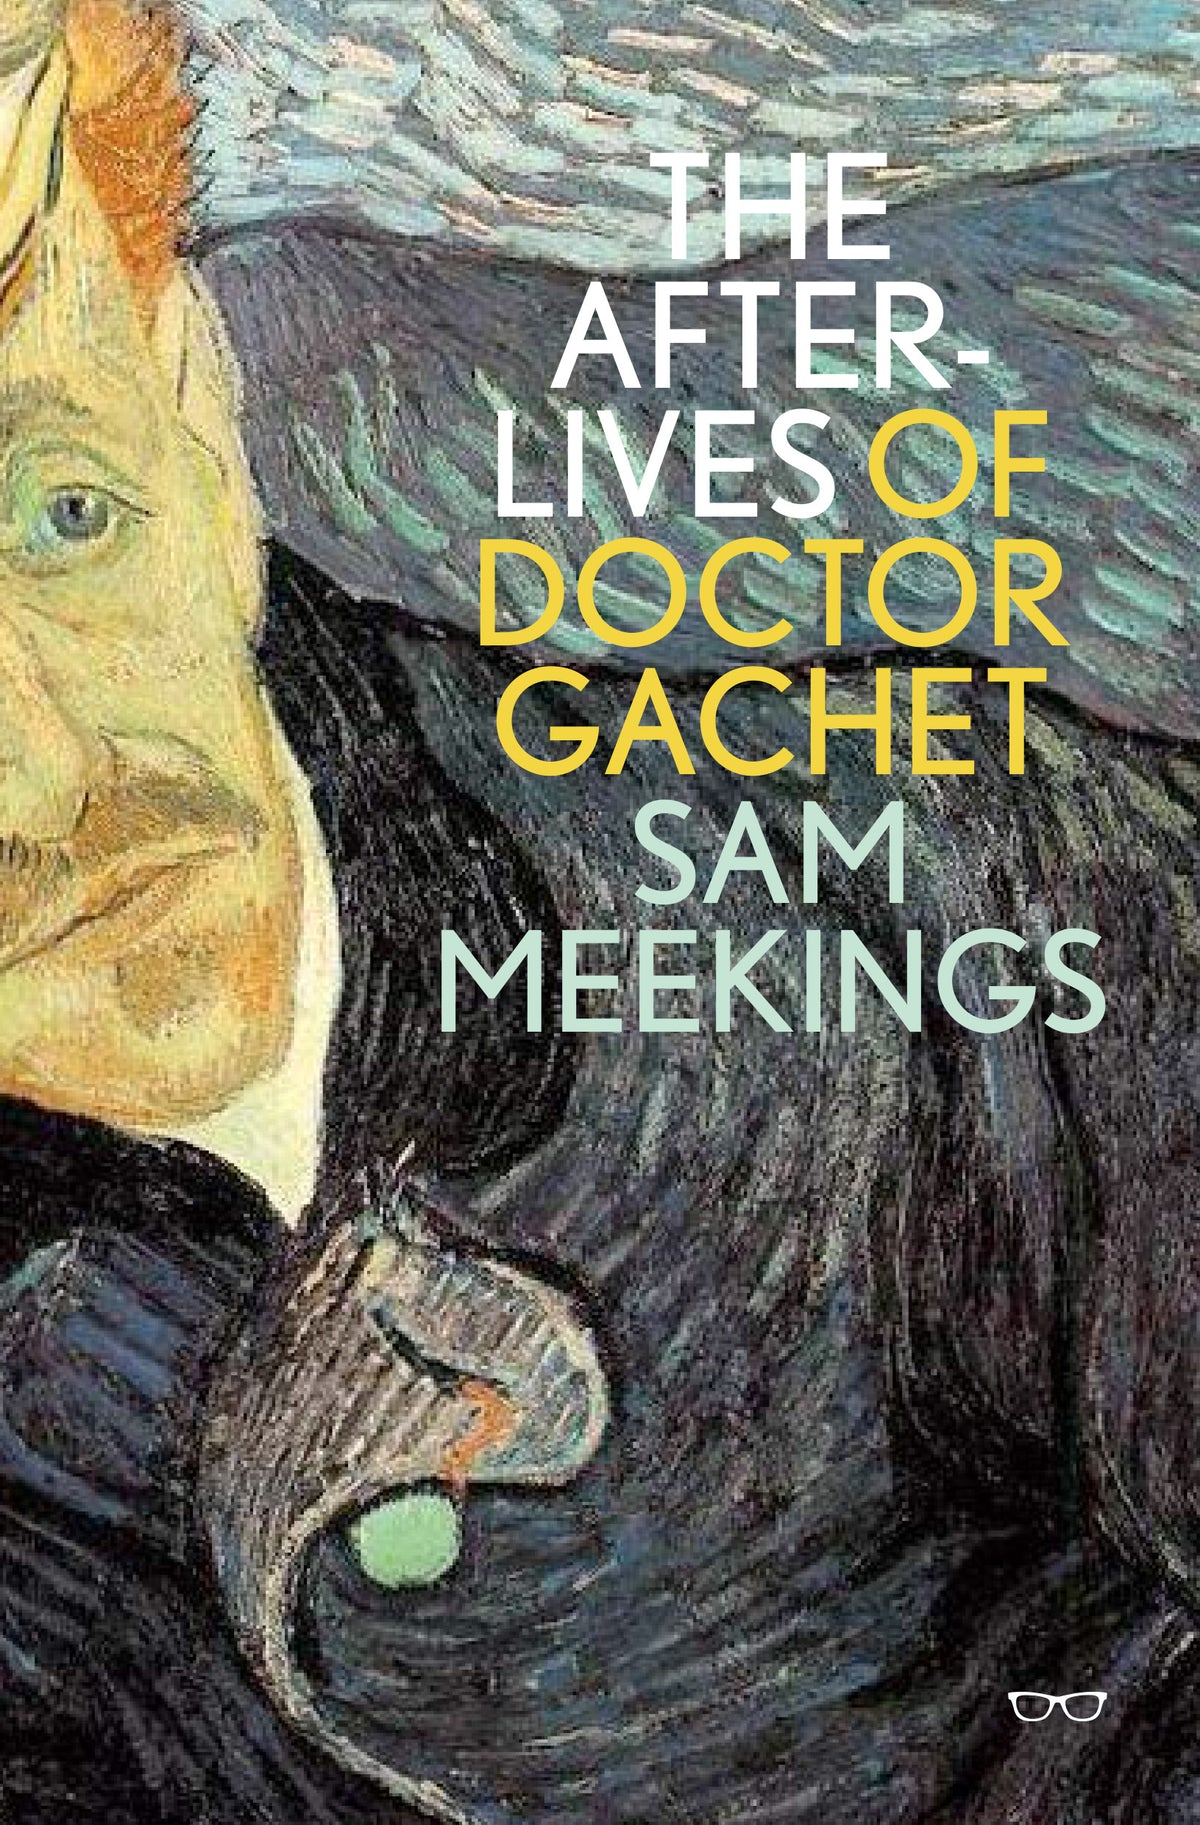 The Afterlives of Doctor Gachet by Sam Meekings